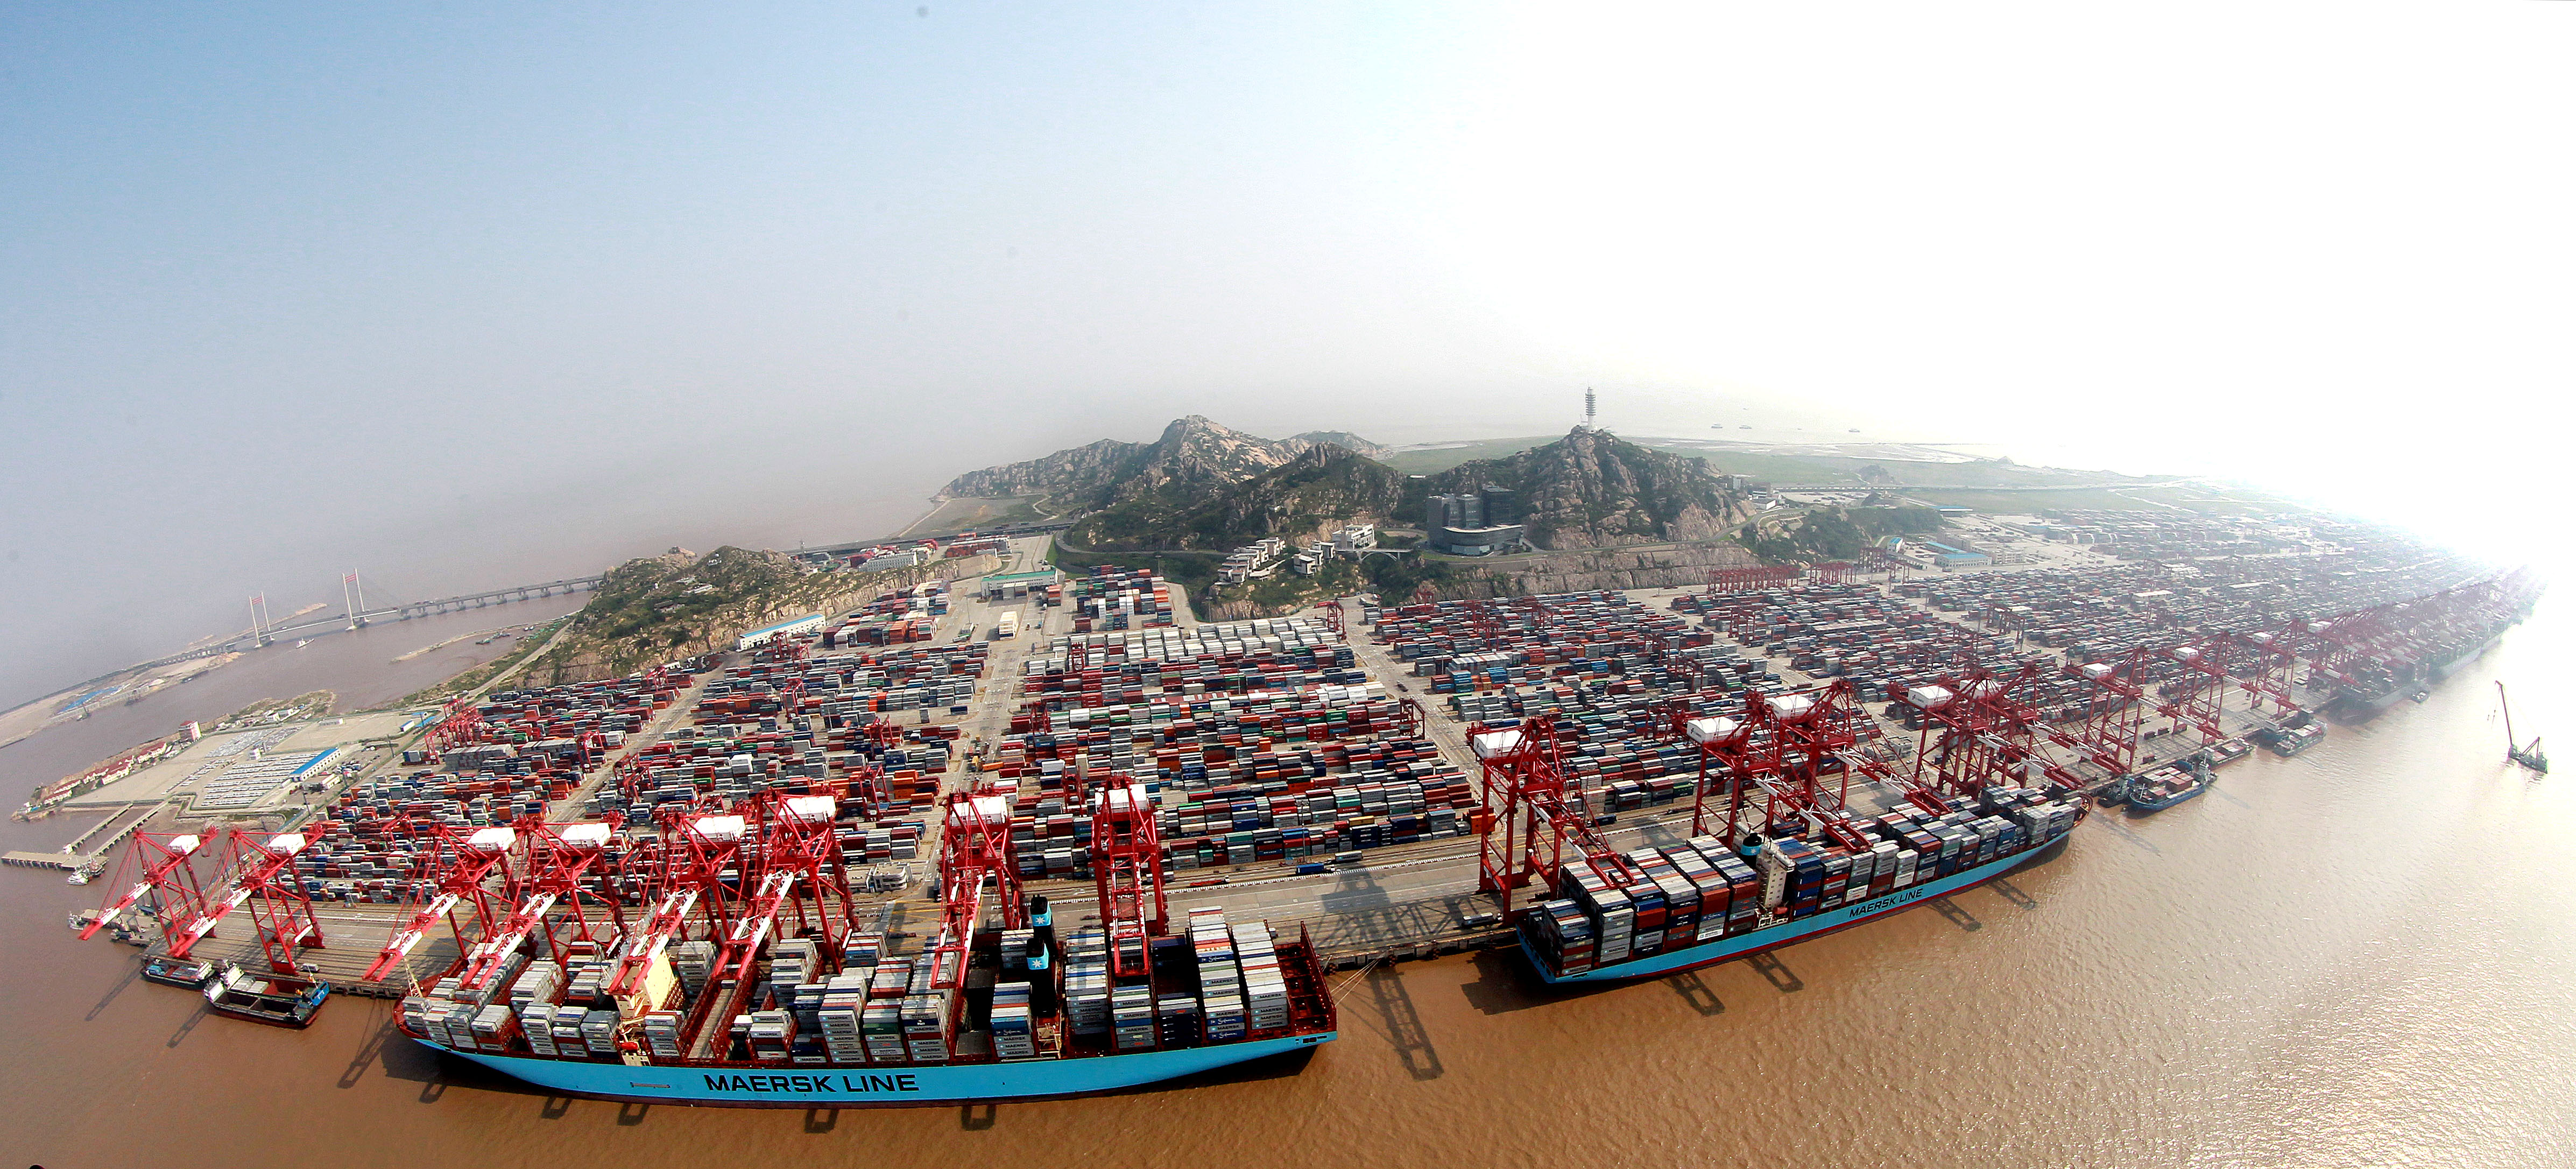 Under new free-trade zone rules, investments by foreign companies will be strictly reviewed if they involve a controlling stake of any business deemed vital to national defence. Photo: Xinhua